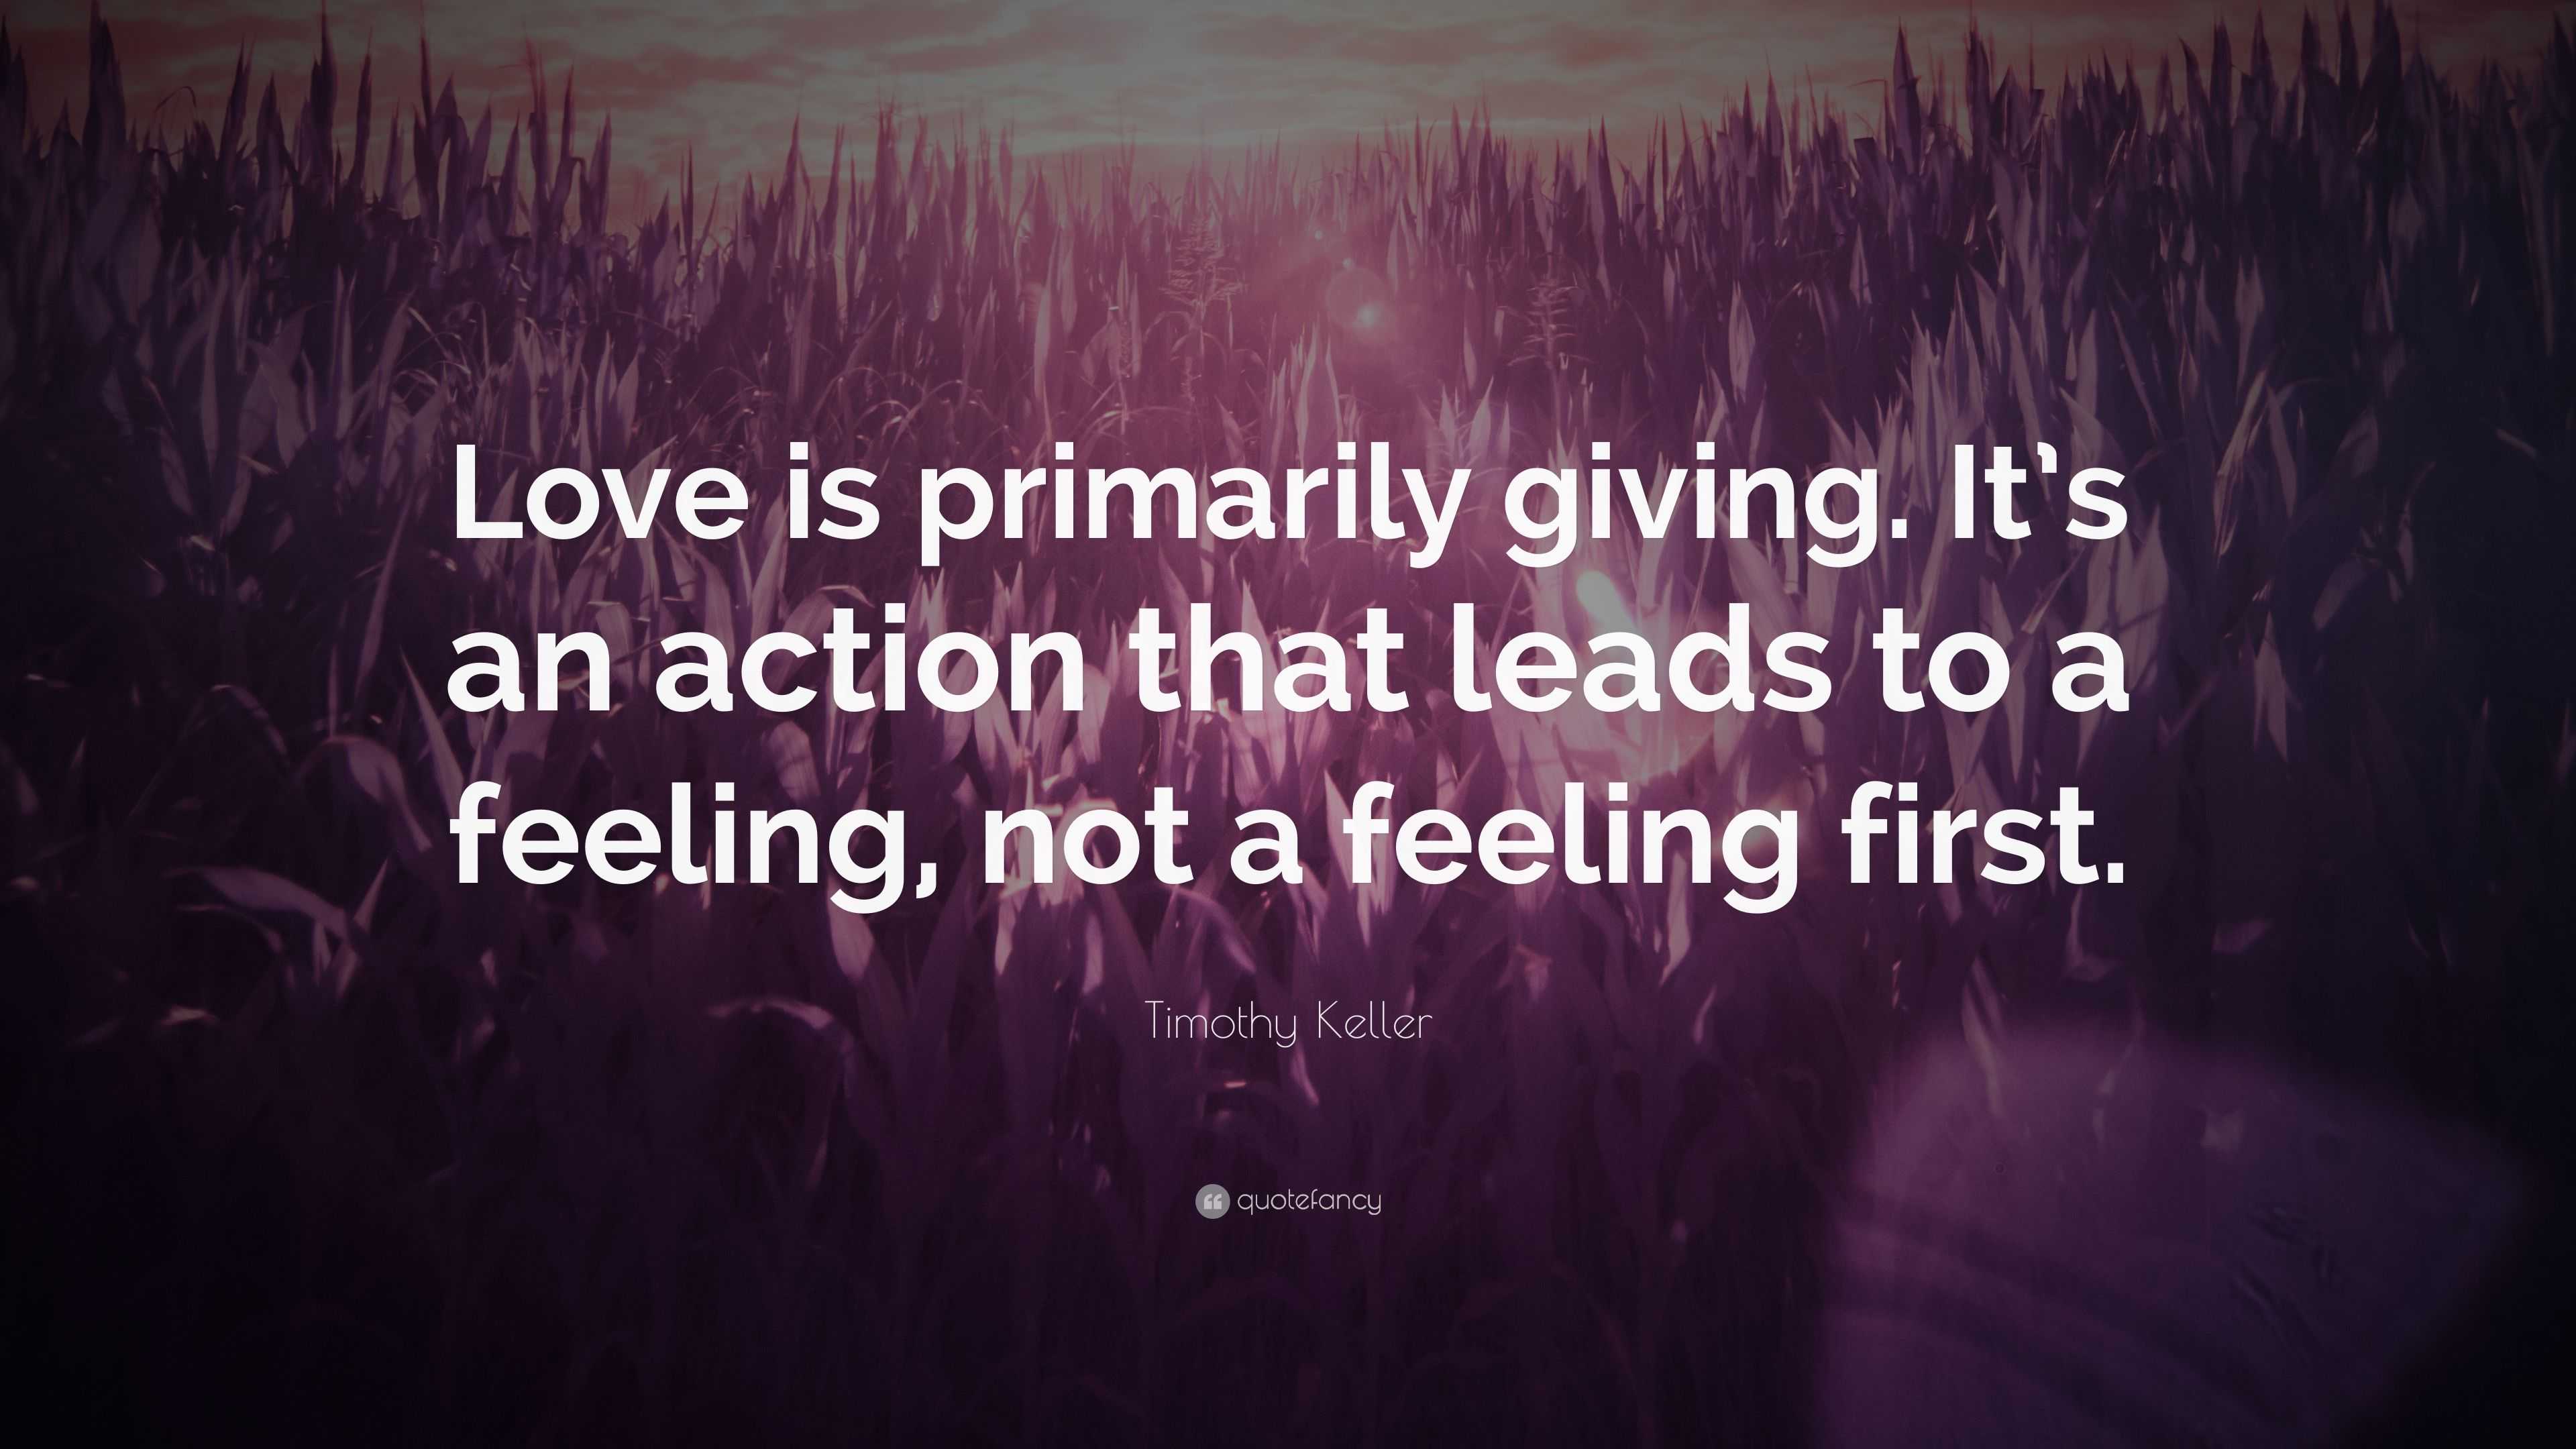 Love is a Series of Actions (Not a Feeling) - Seeking Integrity